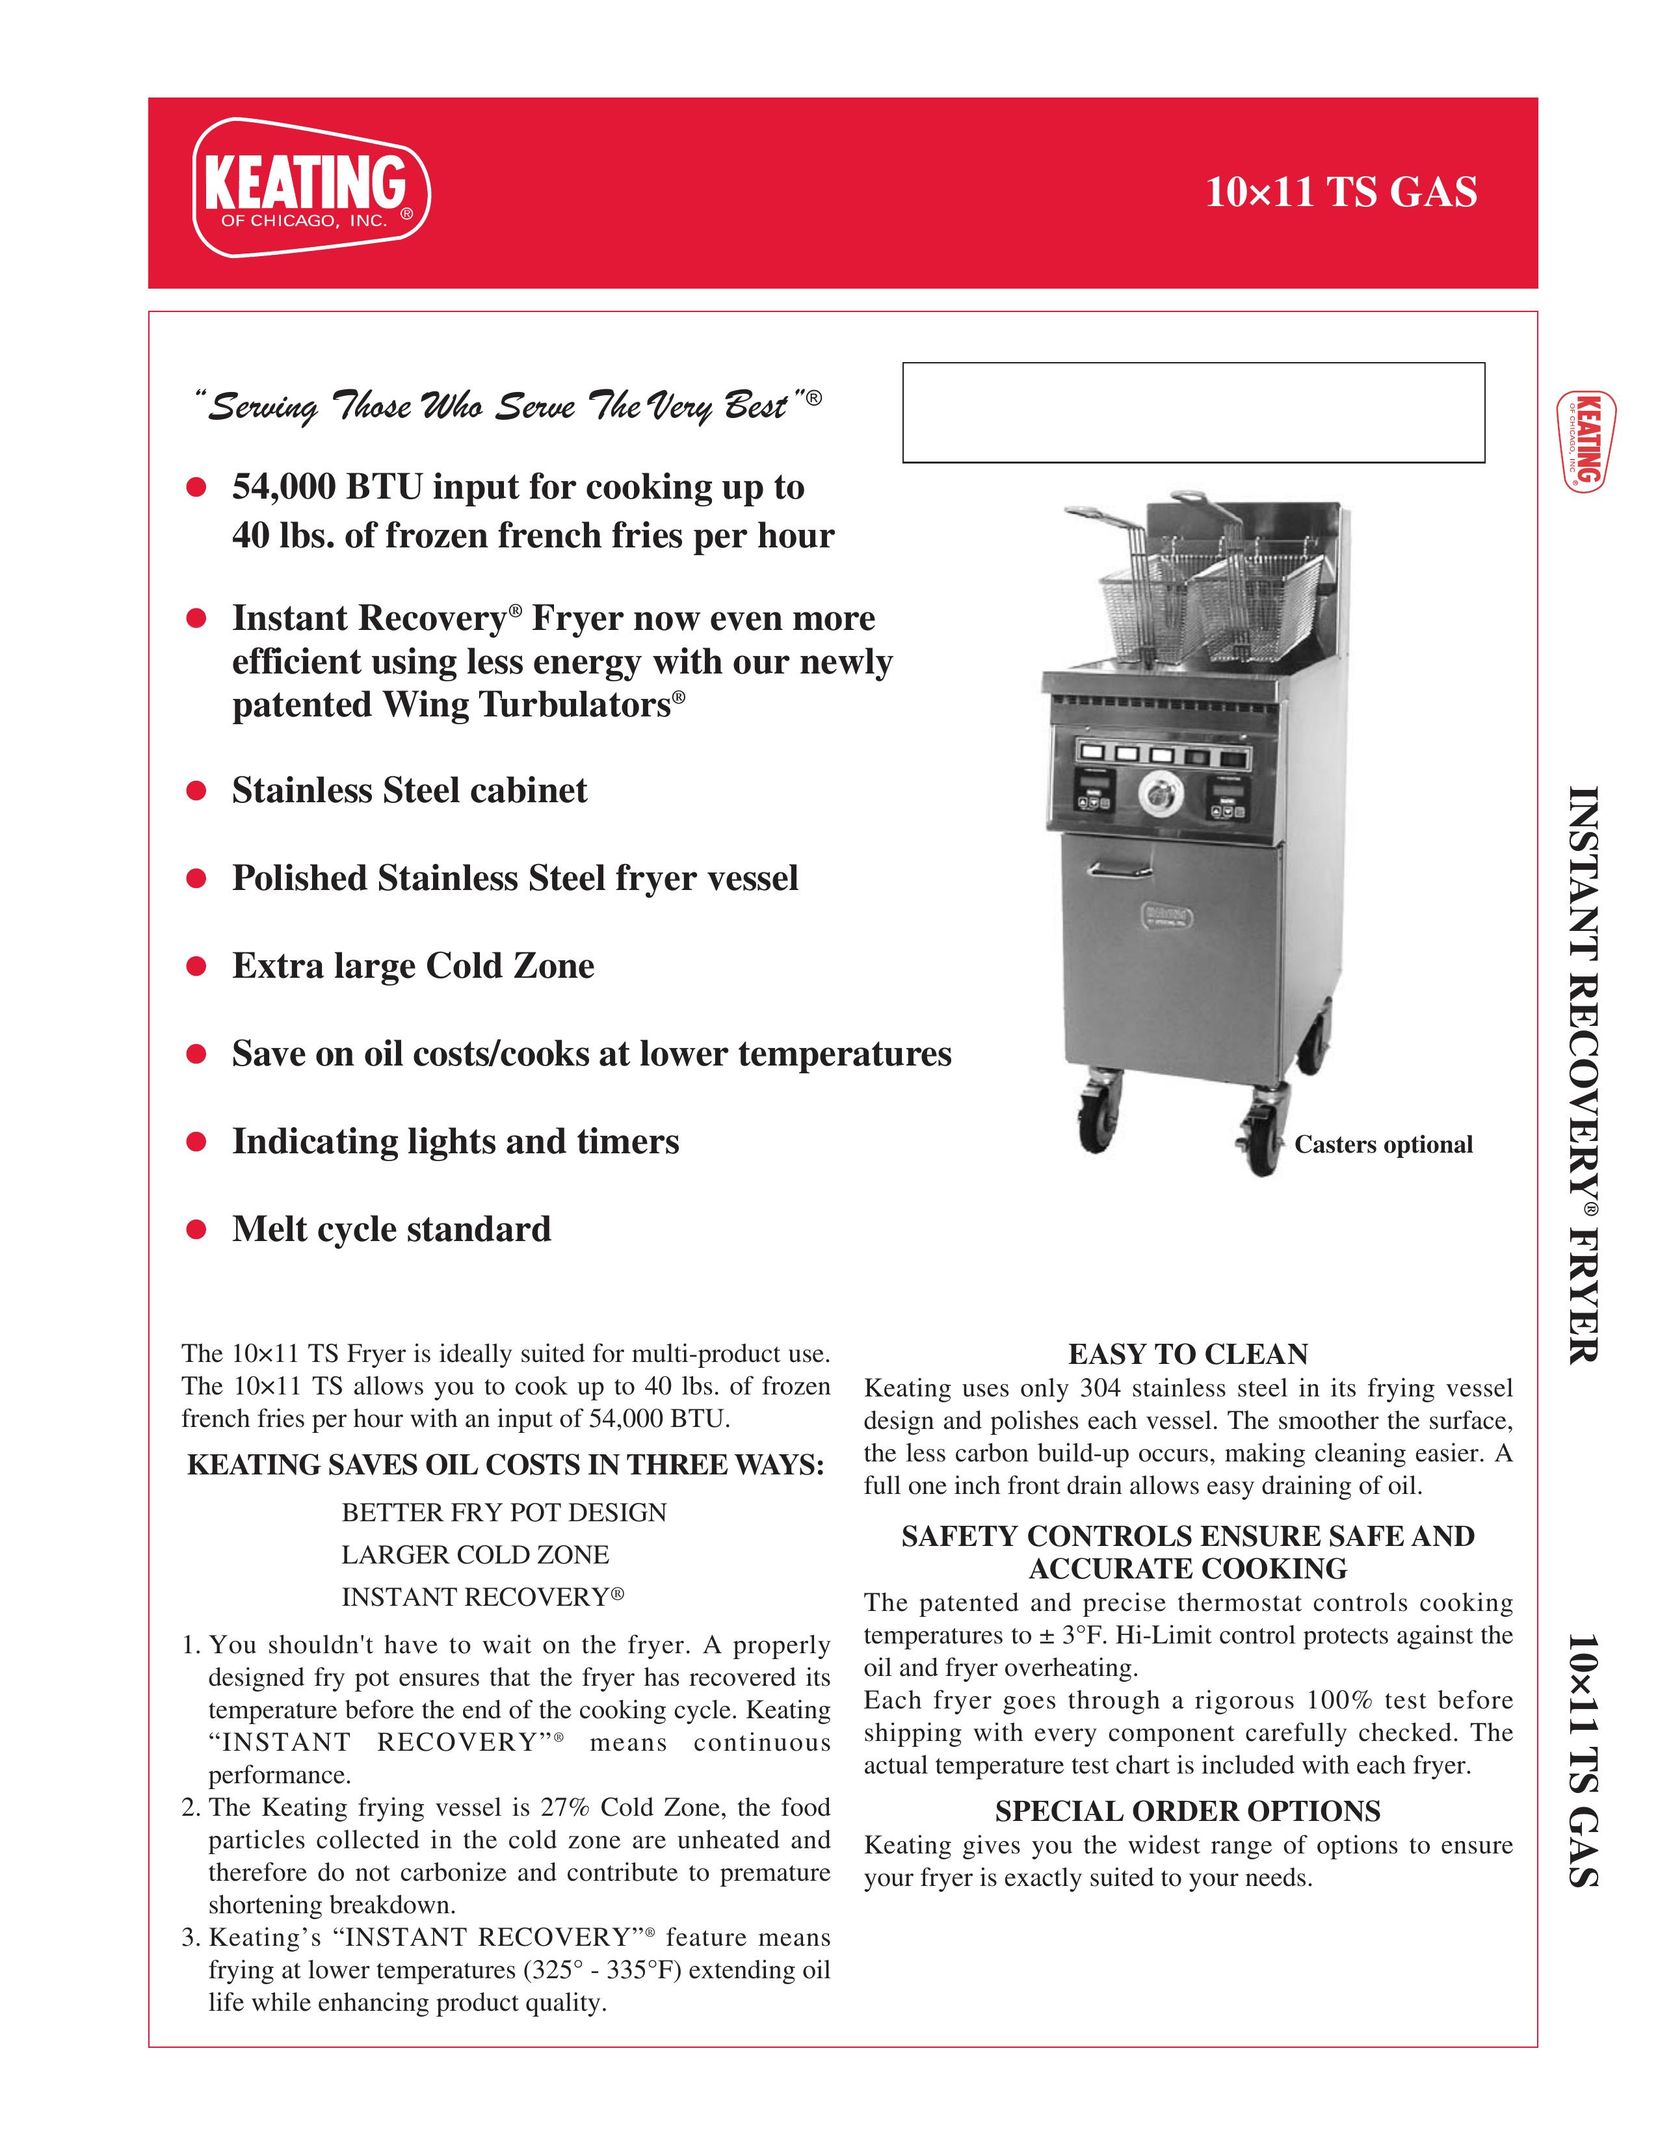 Keating Of Chicago 10x11 TS Gas Fryer User Manual